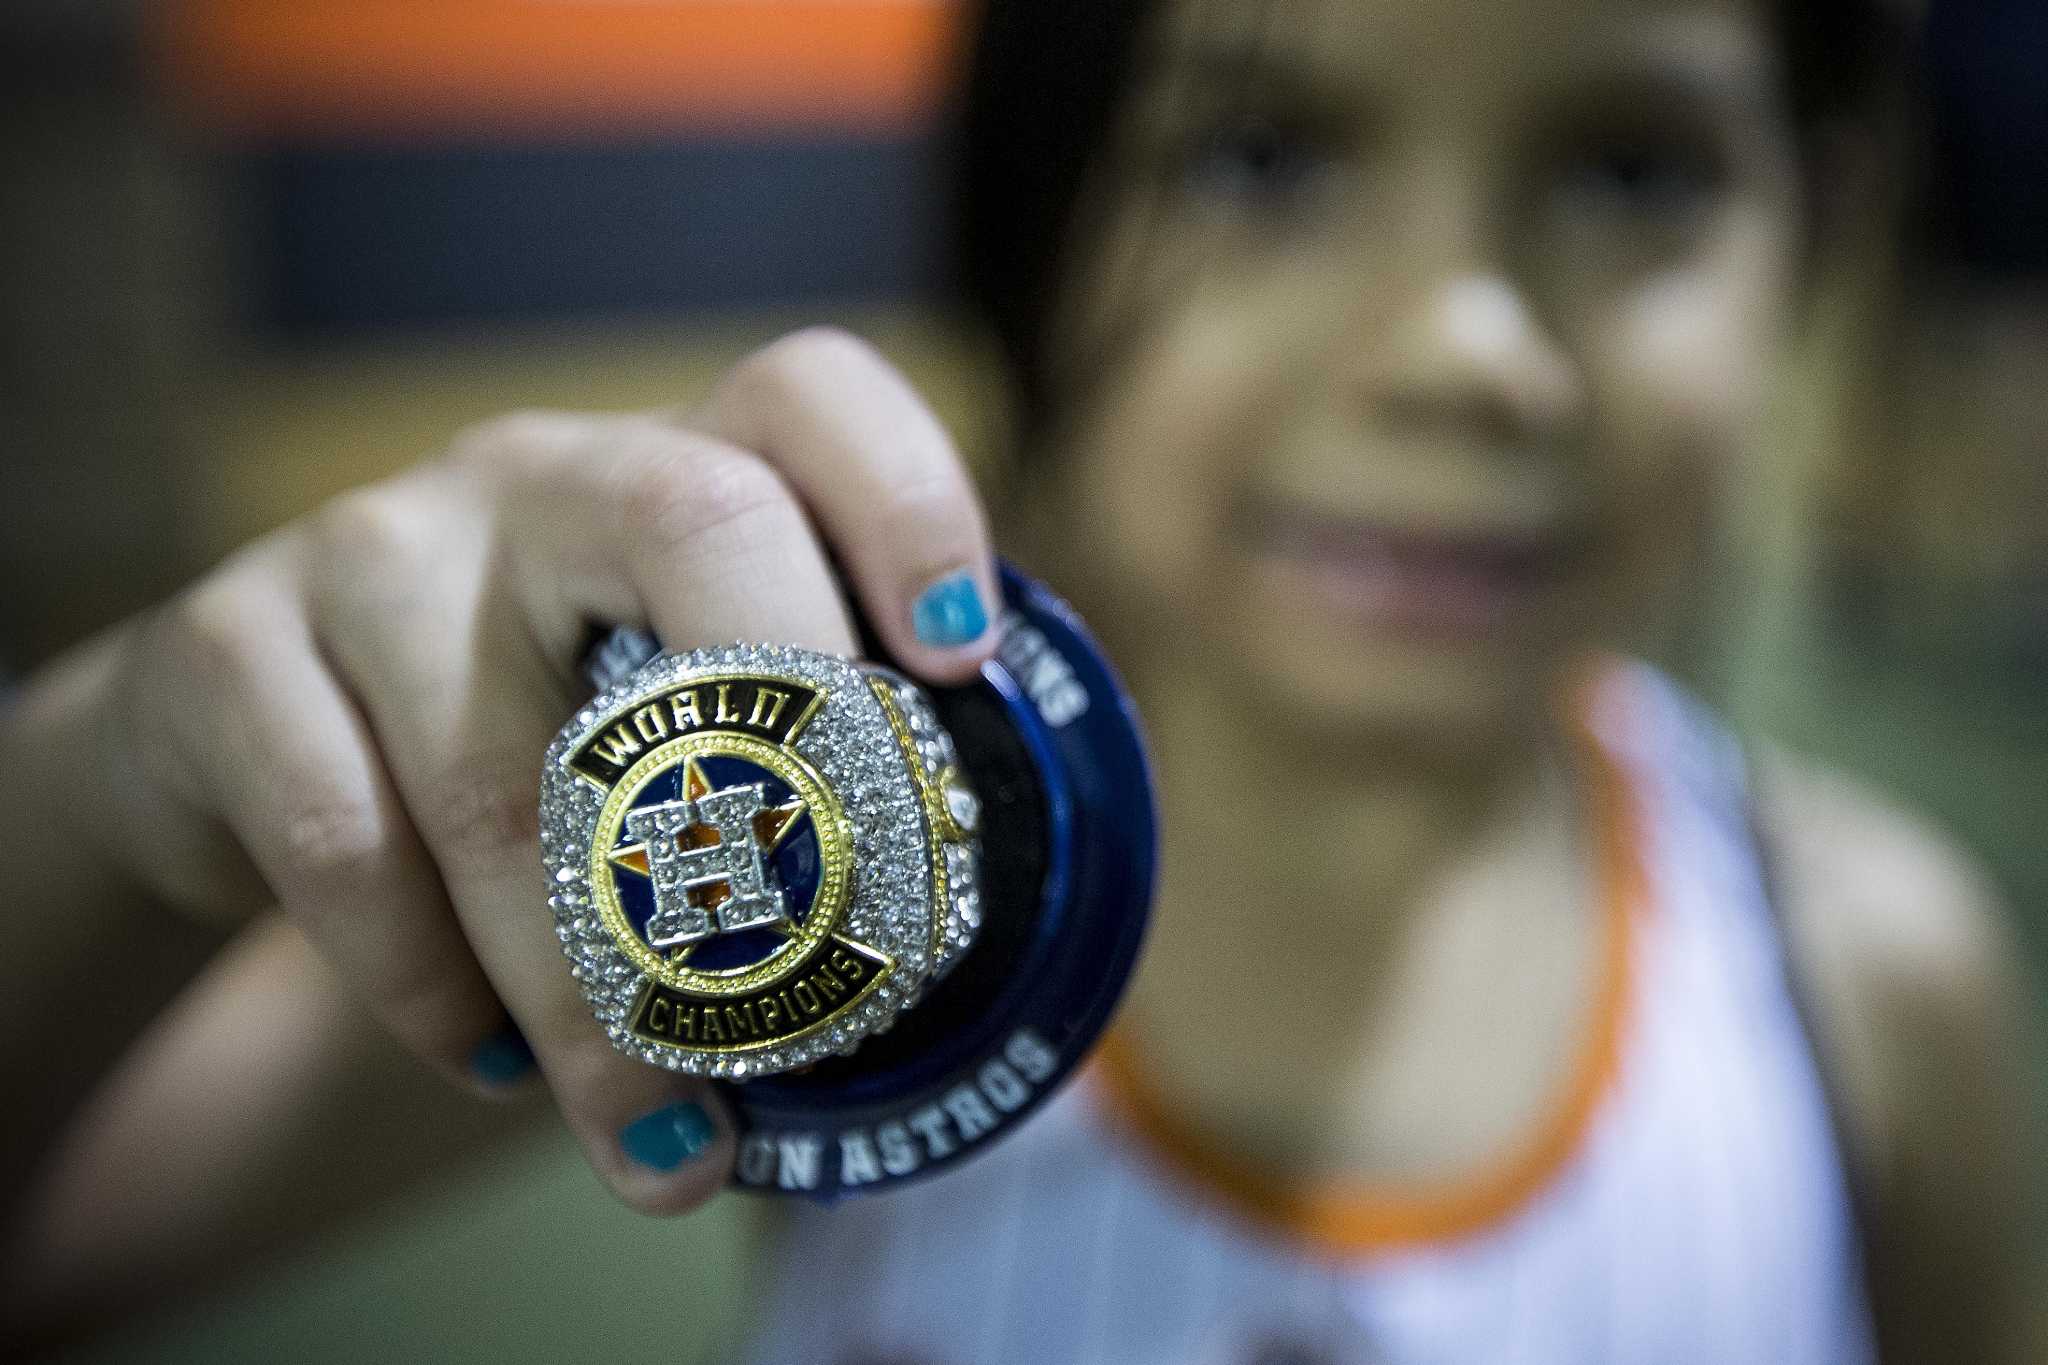 Smith: Astros merit credit for giving fans meaningful memento